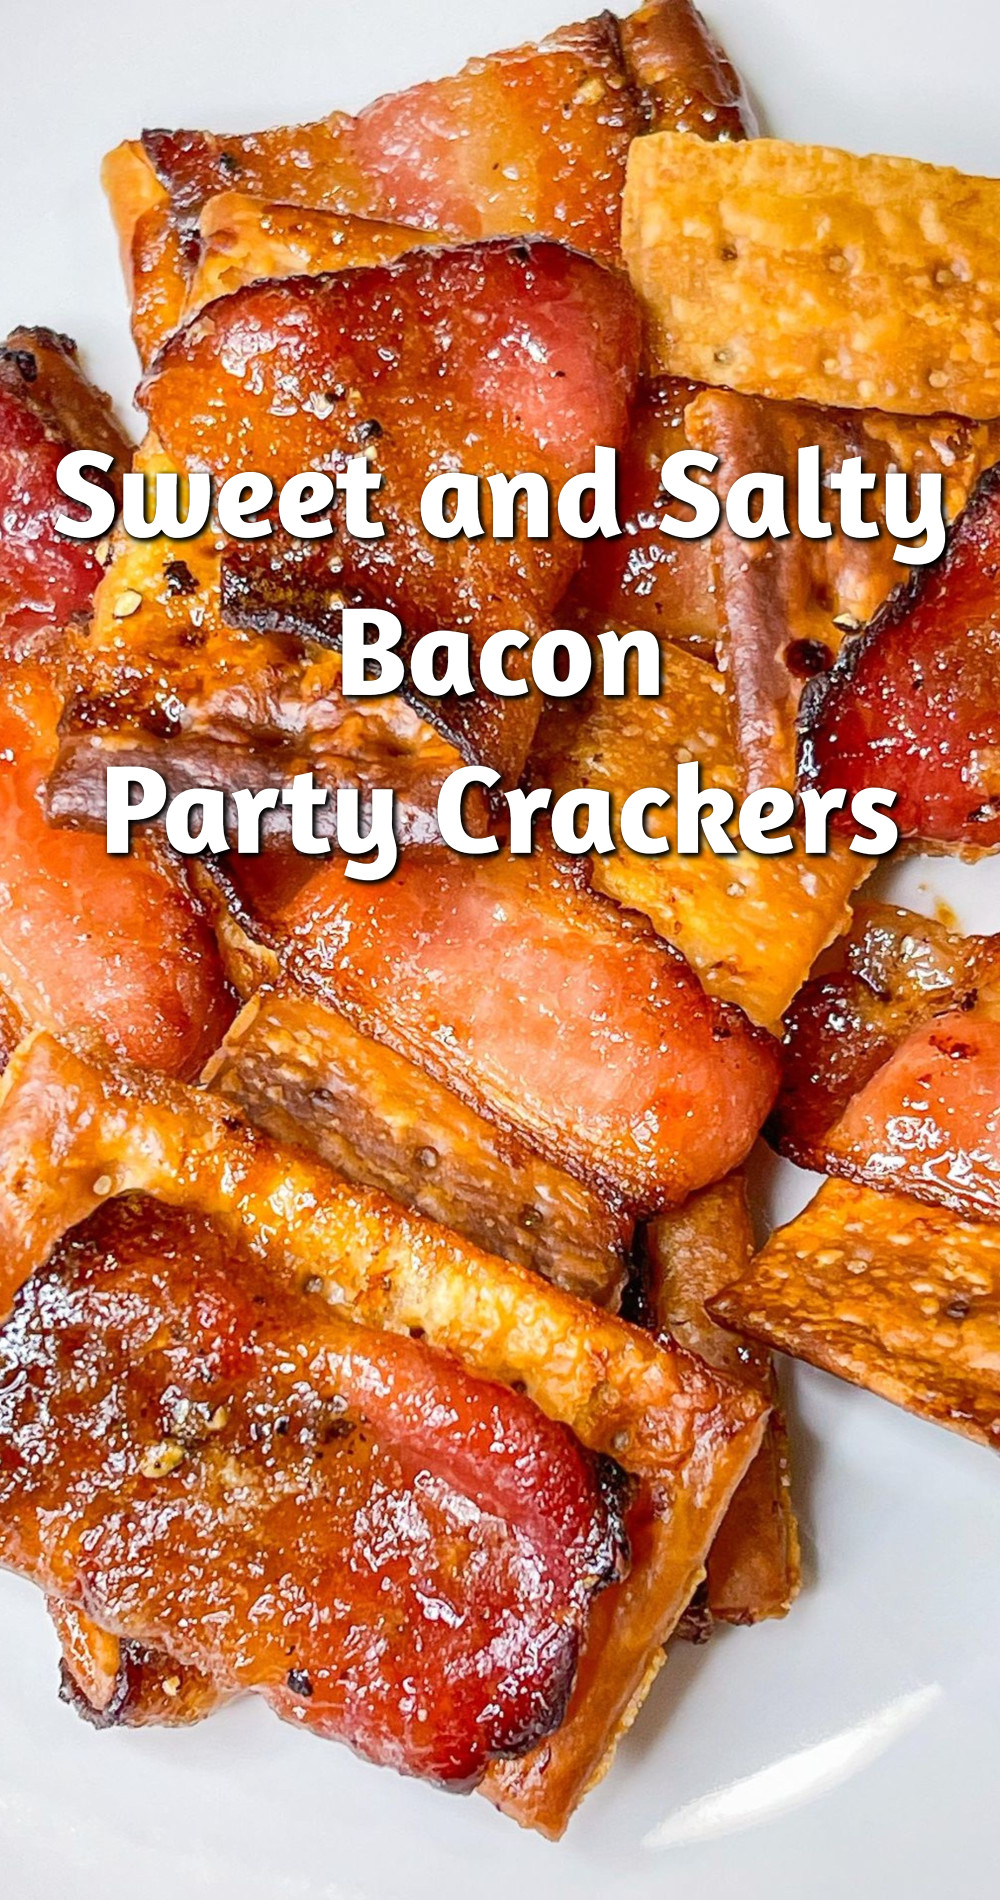 Sweet and Salty Bacon Party Crackers